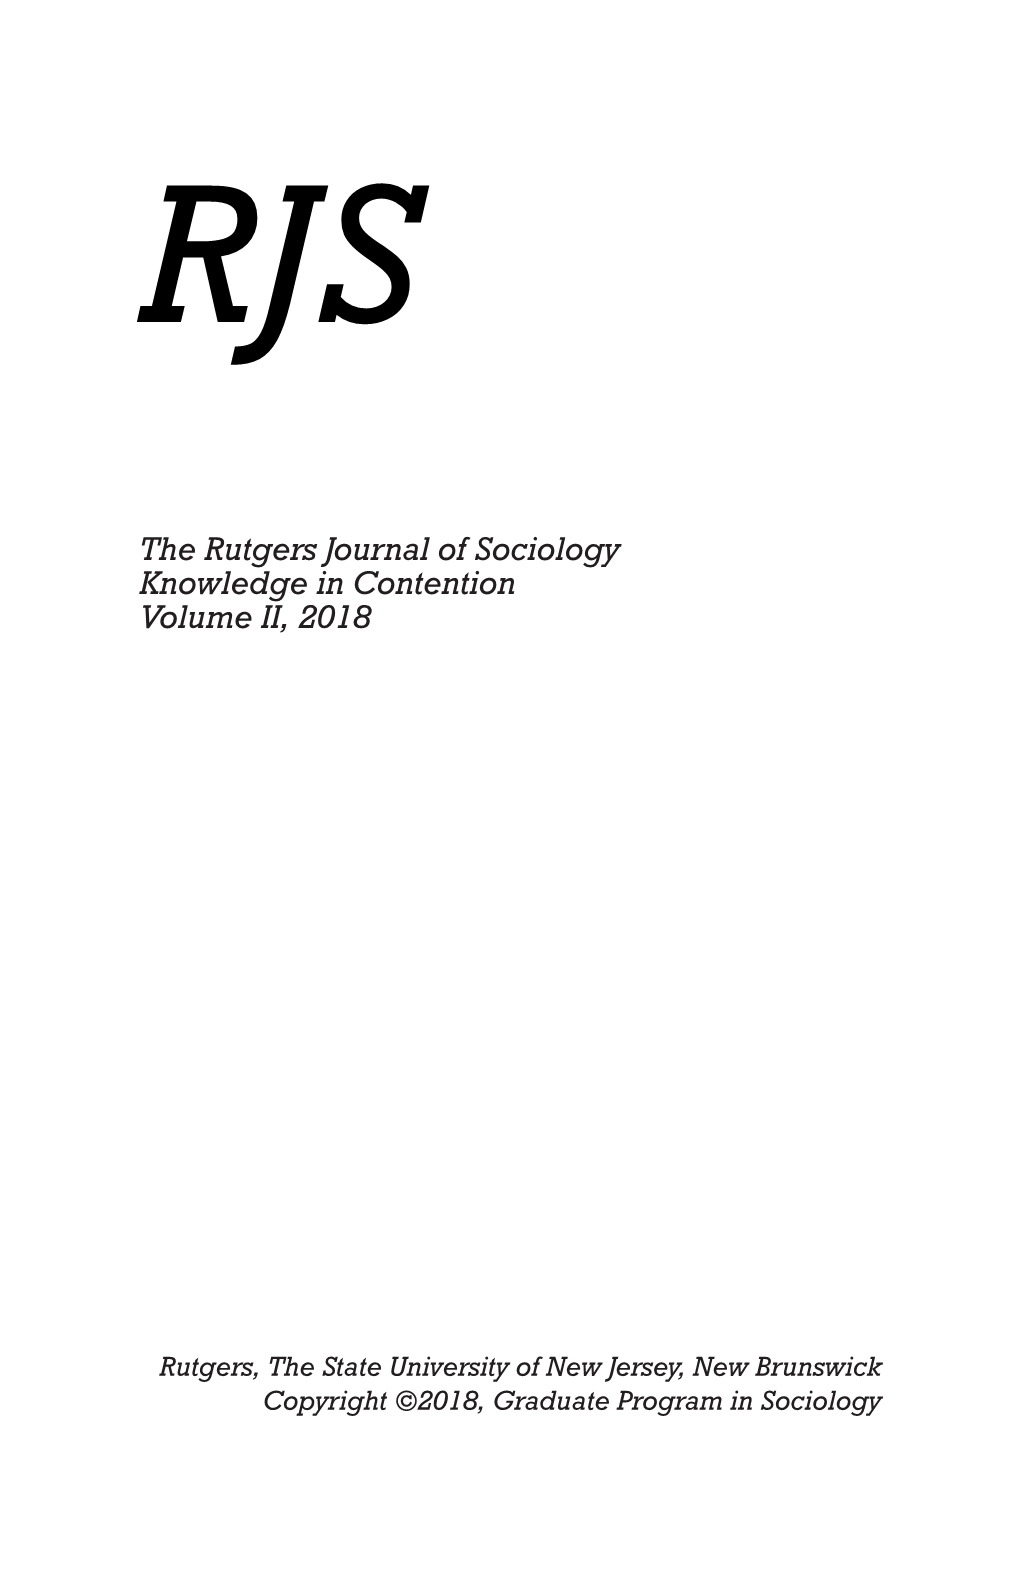 Rutgers Journal of Sociology Knowledge in Contention Volume II, 2018